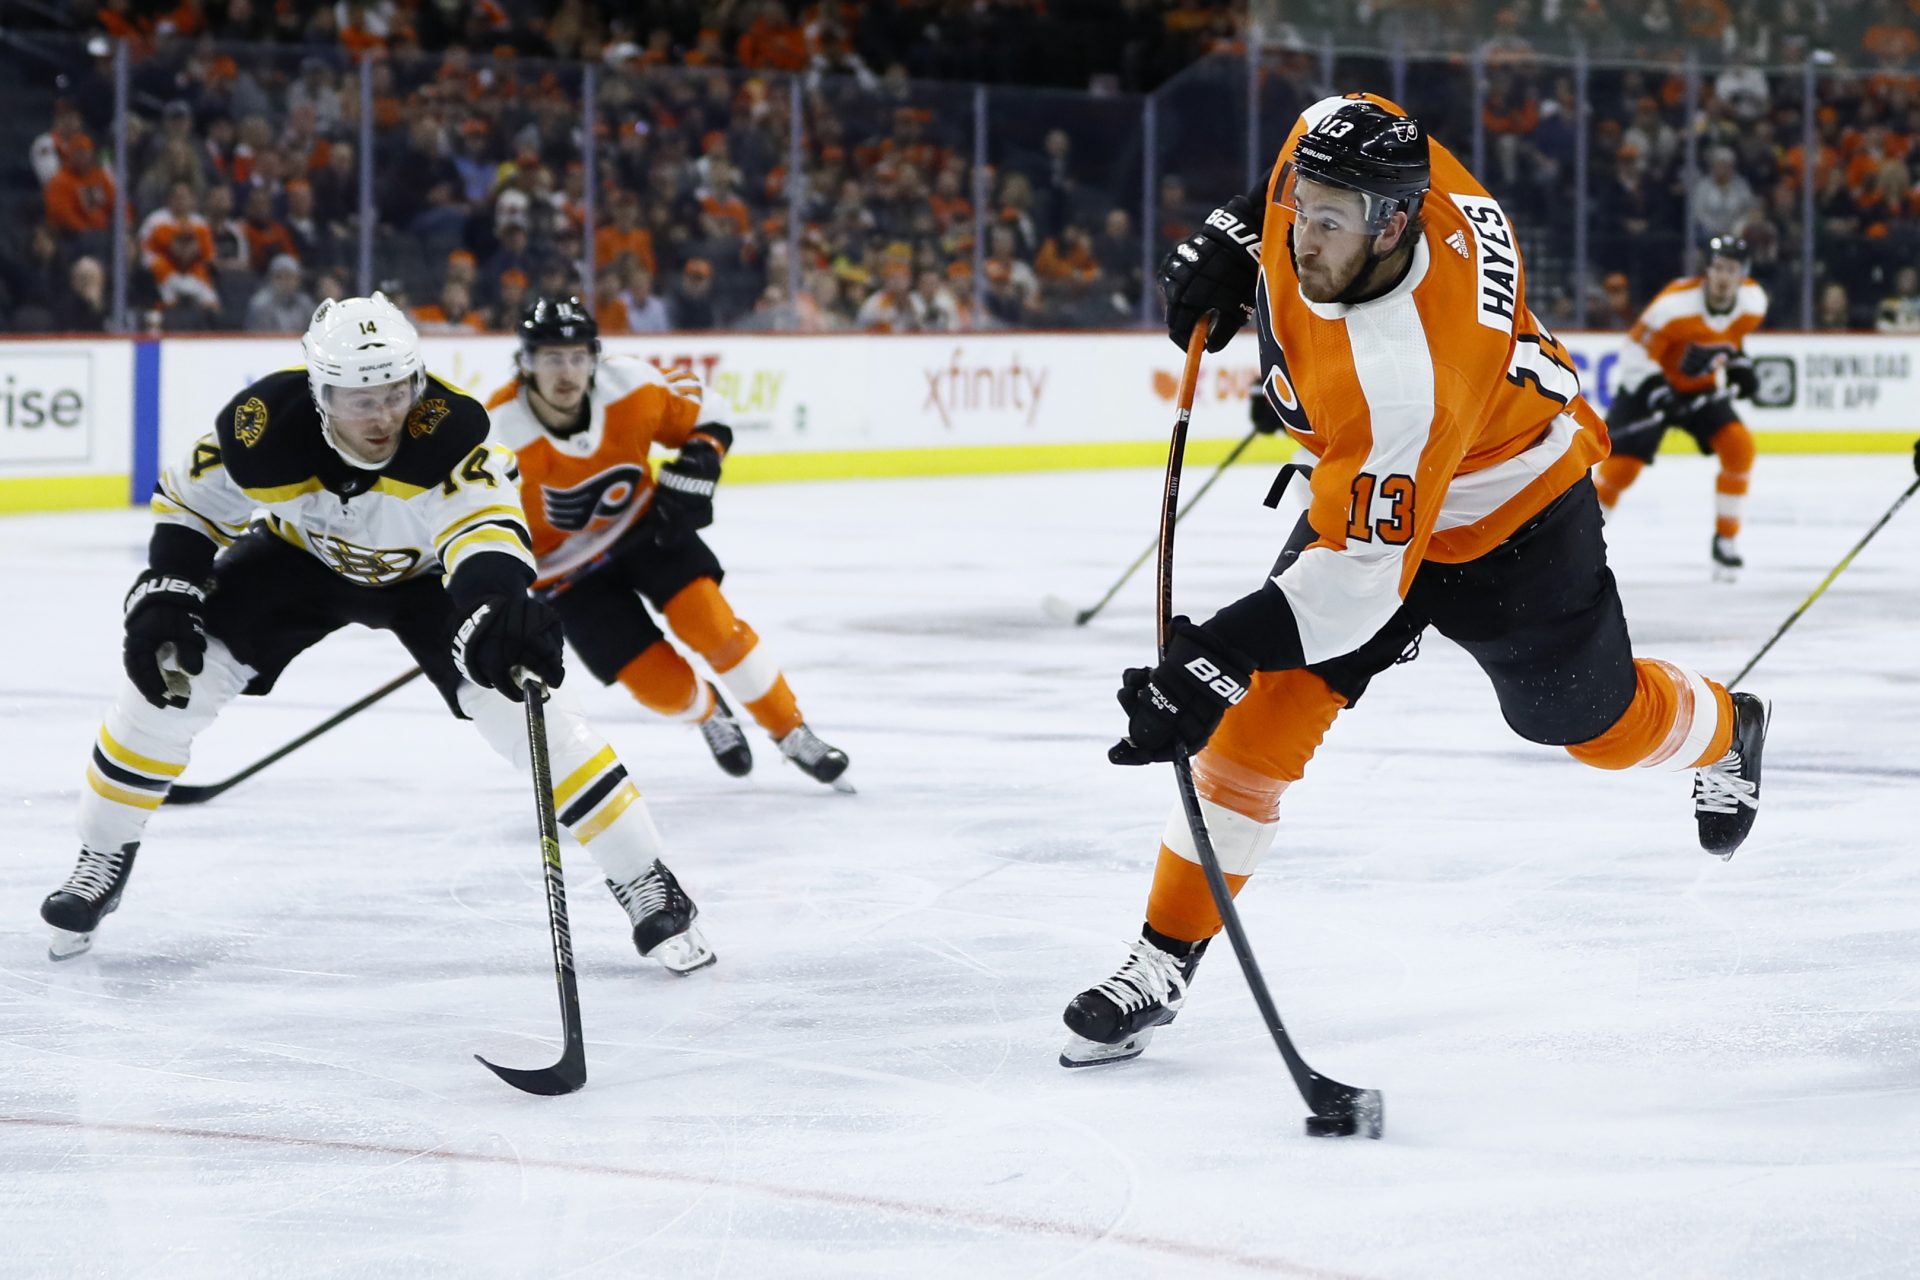 Philadelphia Flyers' Kevin Hayes, right, takes a shot past Boston Bruins' Chris Wagner during the second period of an NHL hockey game, Tuesday, March 10, 2020, in Philadelphia.